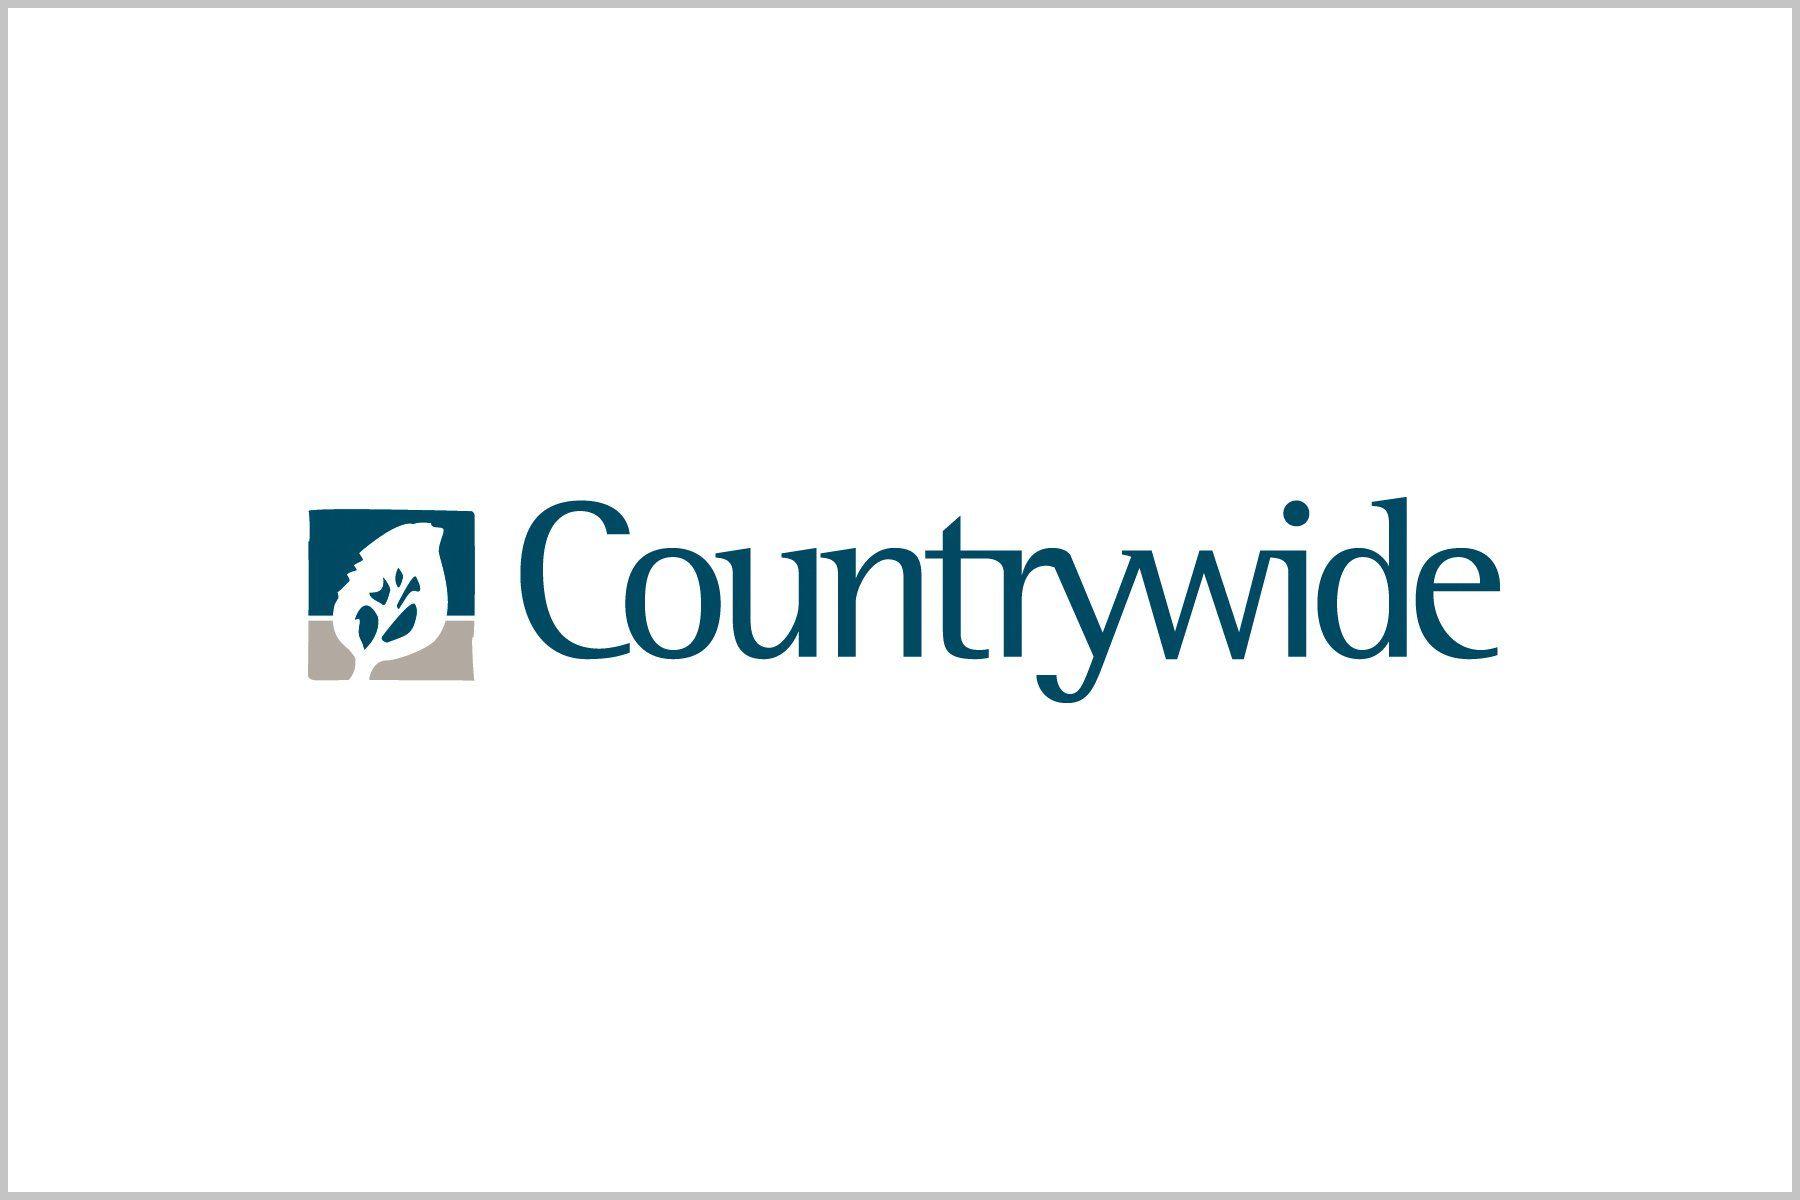 Countrywide Logo - Our brands